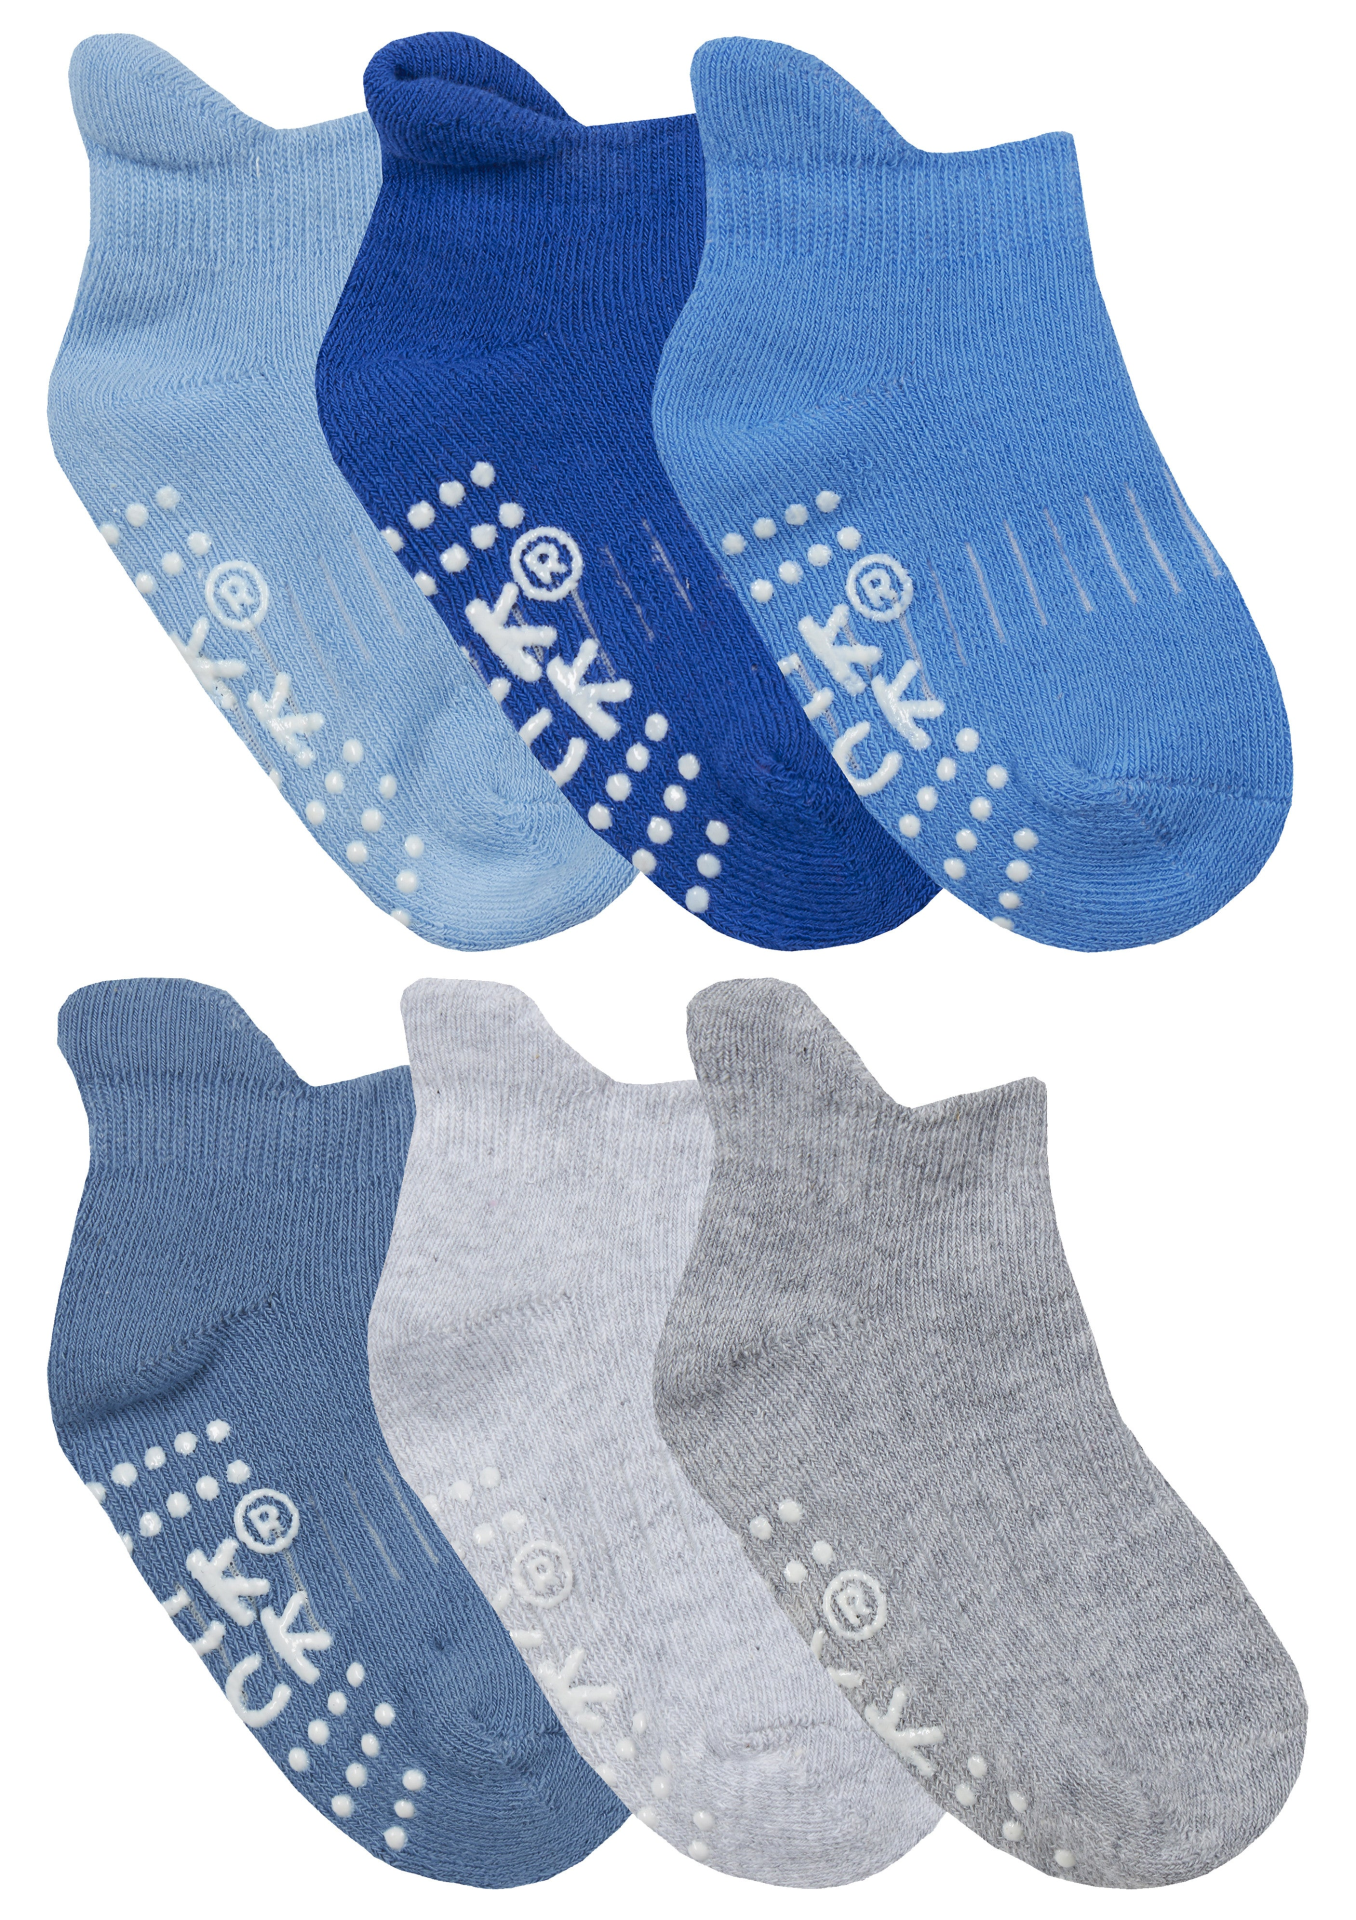 12 Pairs Baby Trainer Cotton Socks with Grips